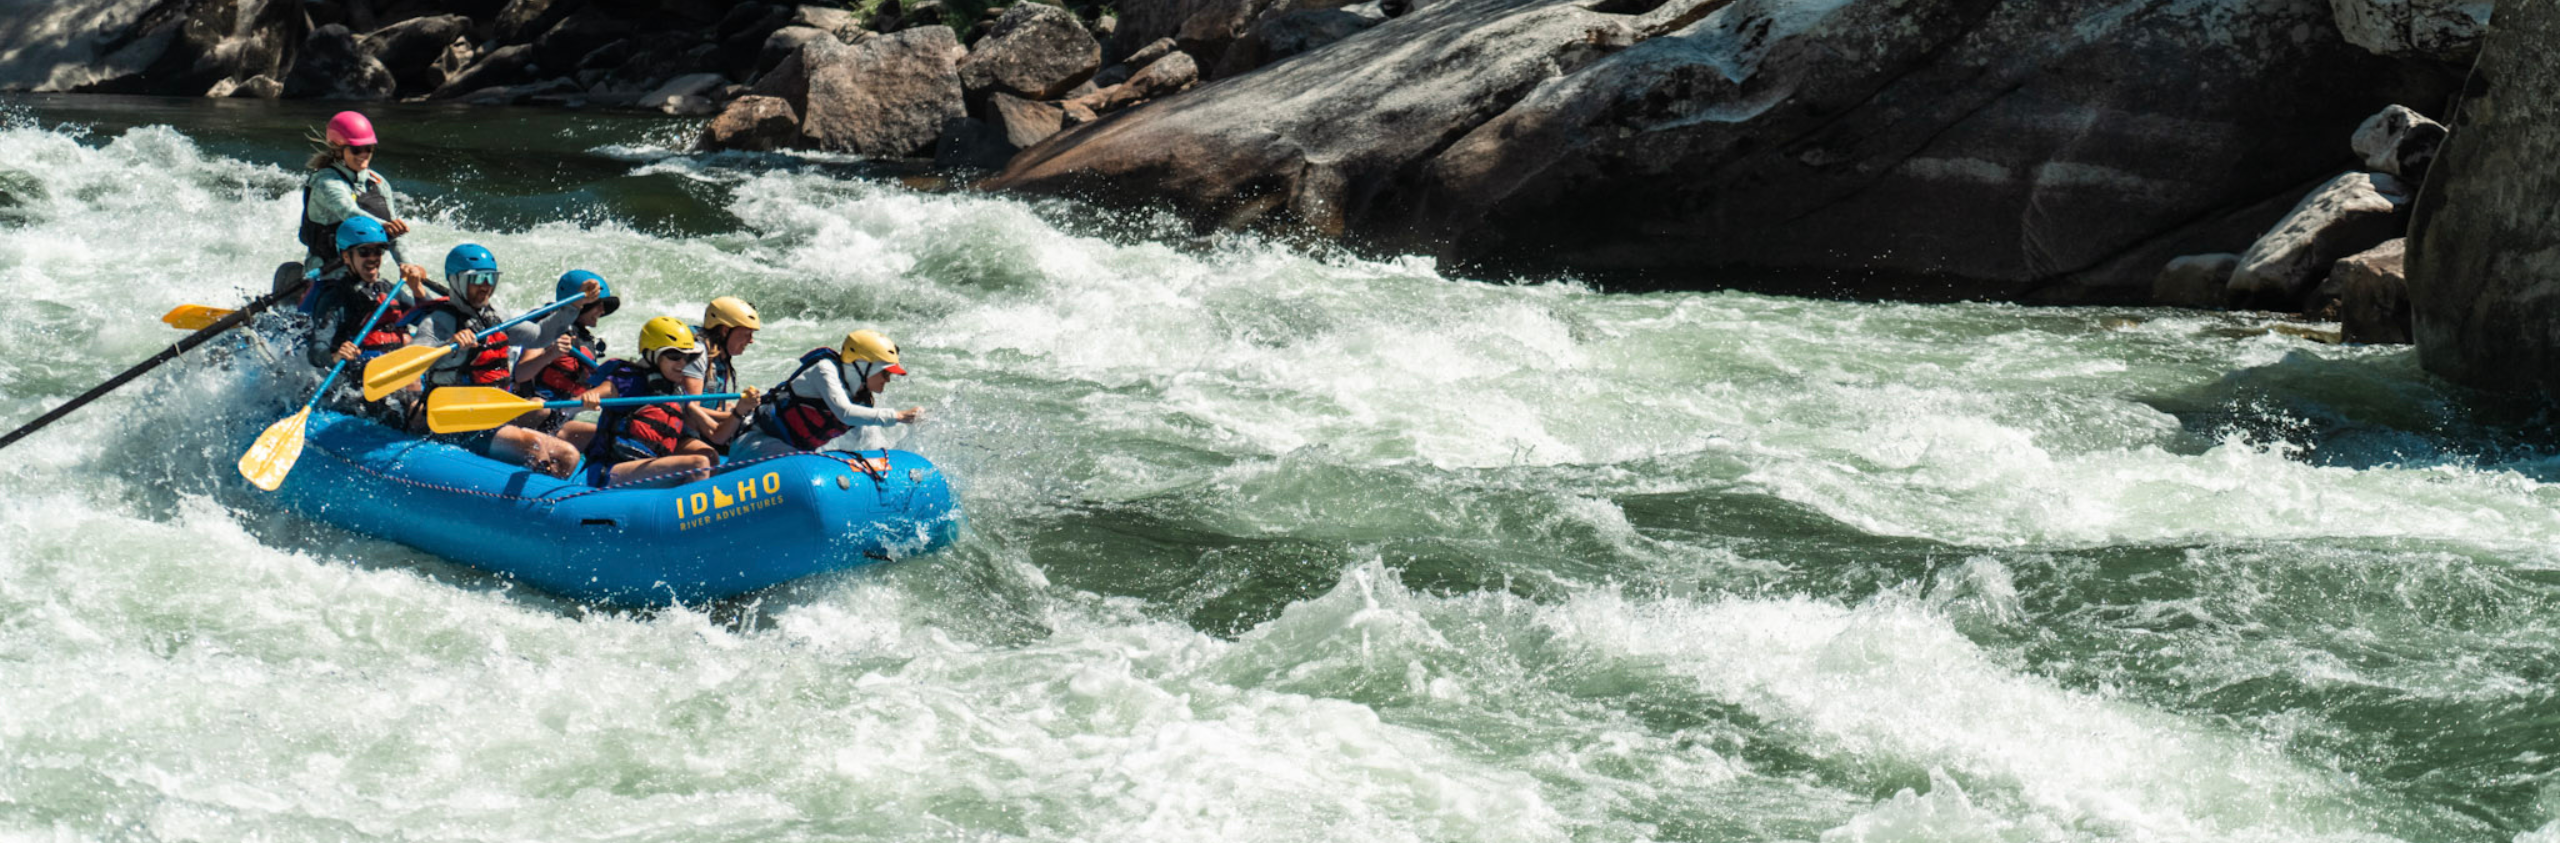 group of people going through a rapid on the main salmon river